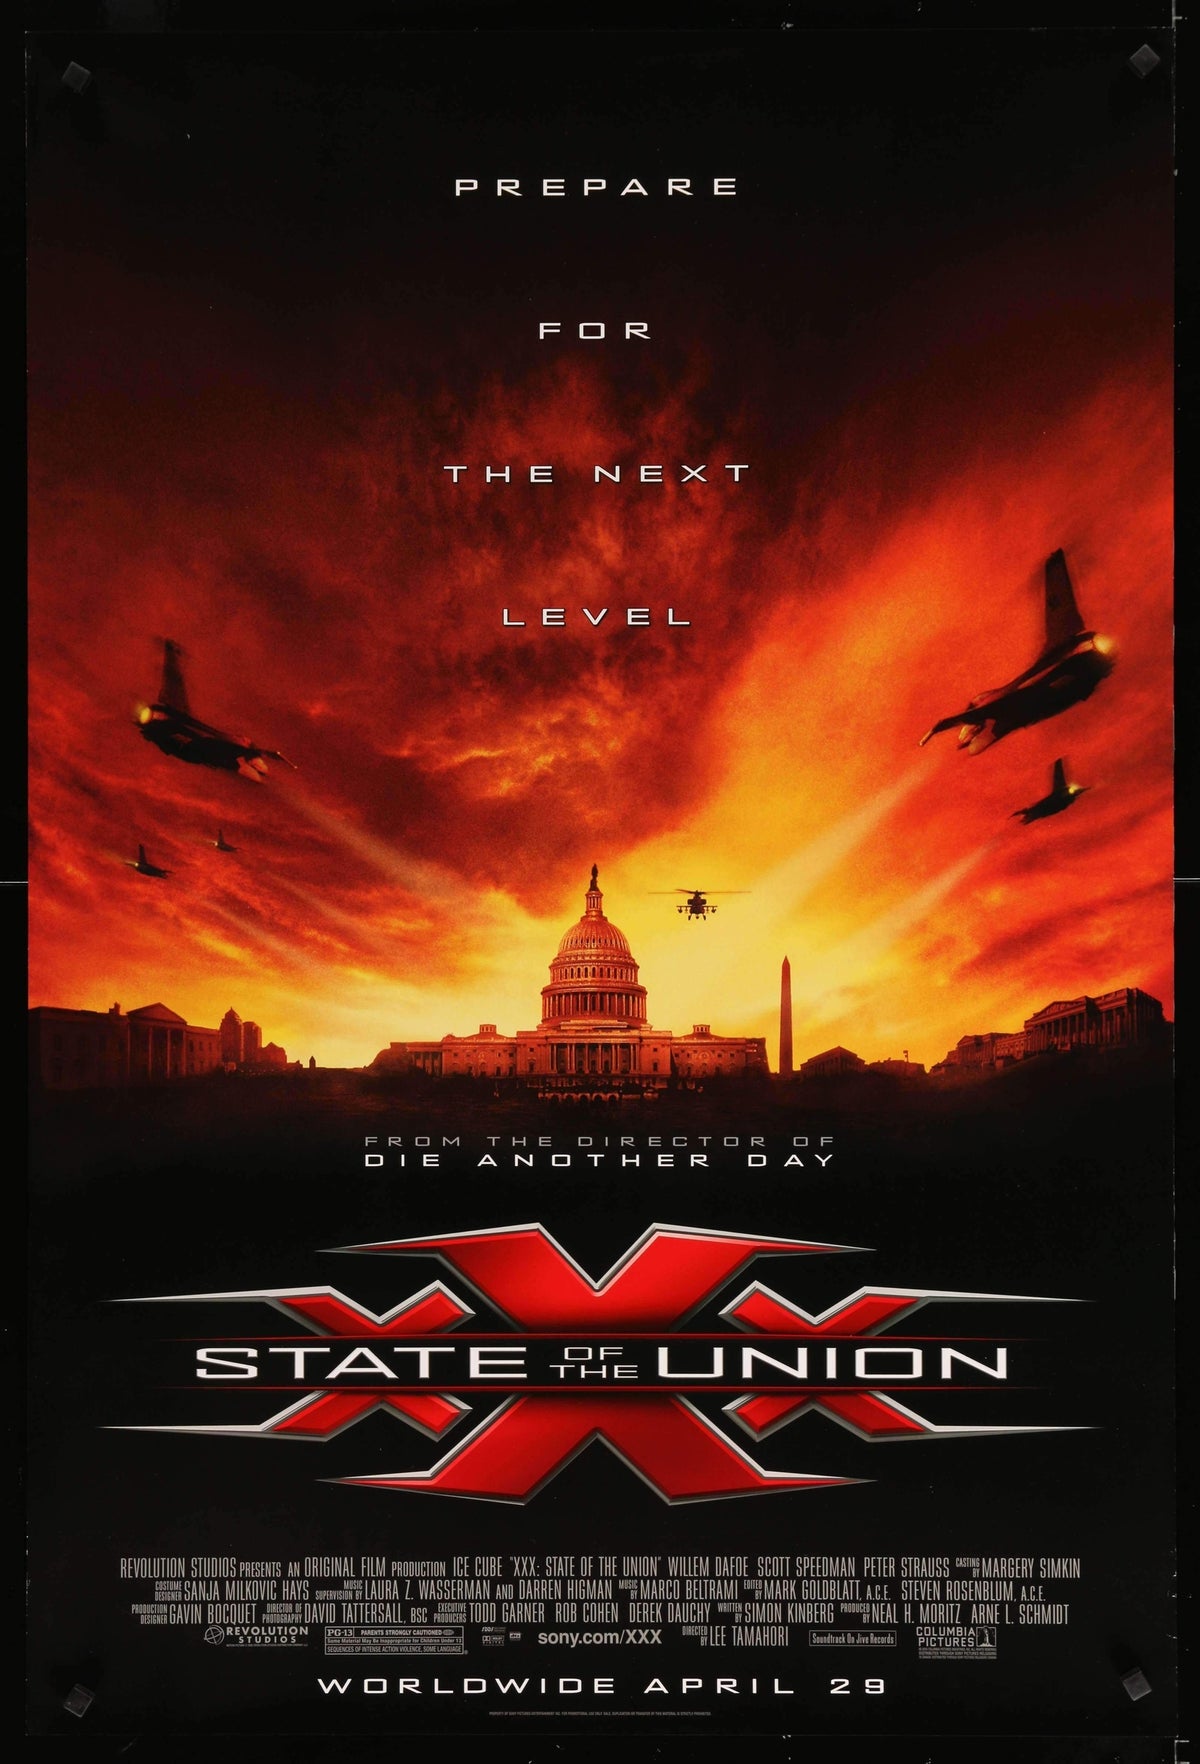 xXx: State of the Union (2005) original movie poster for sale at Original Film Art